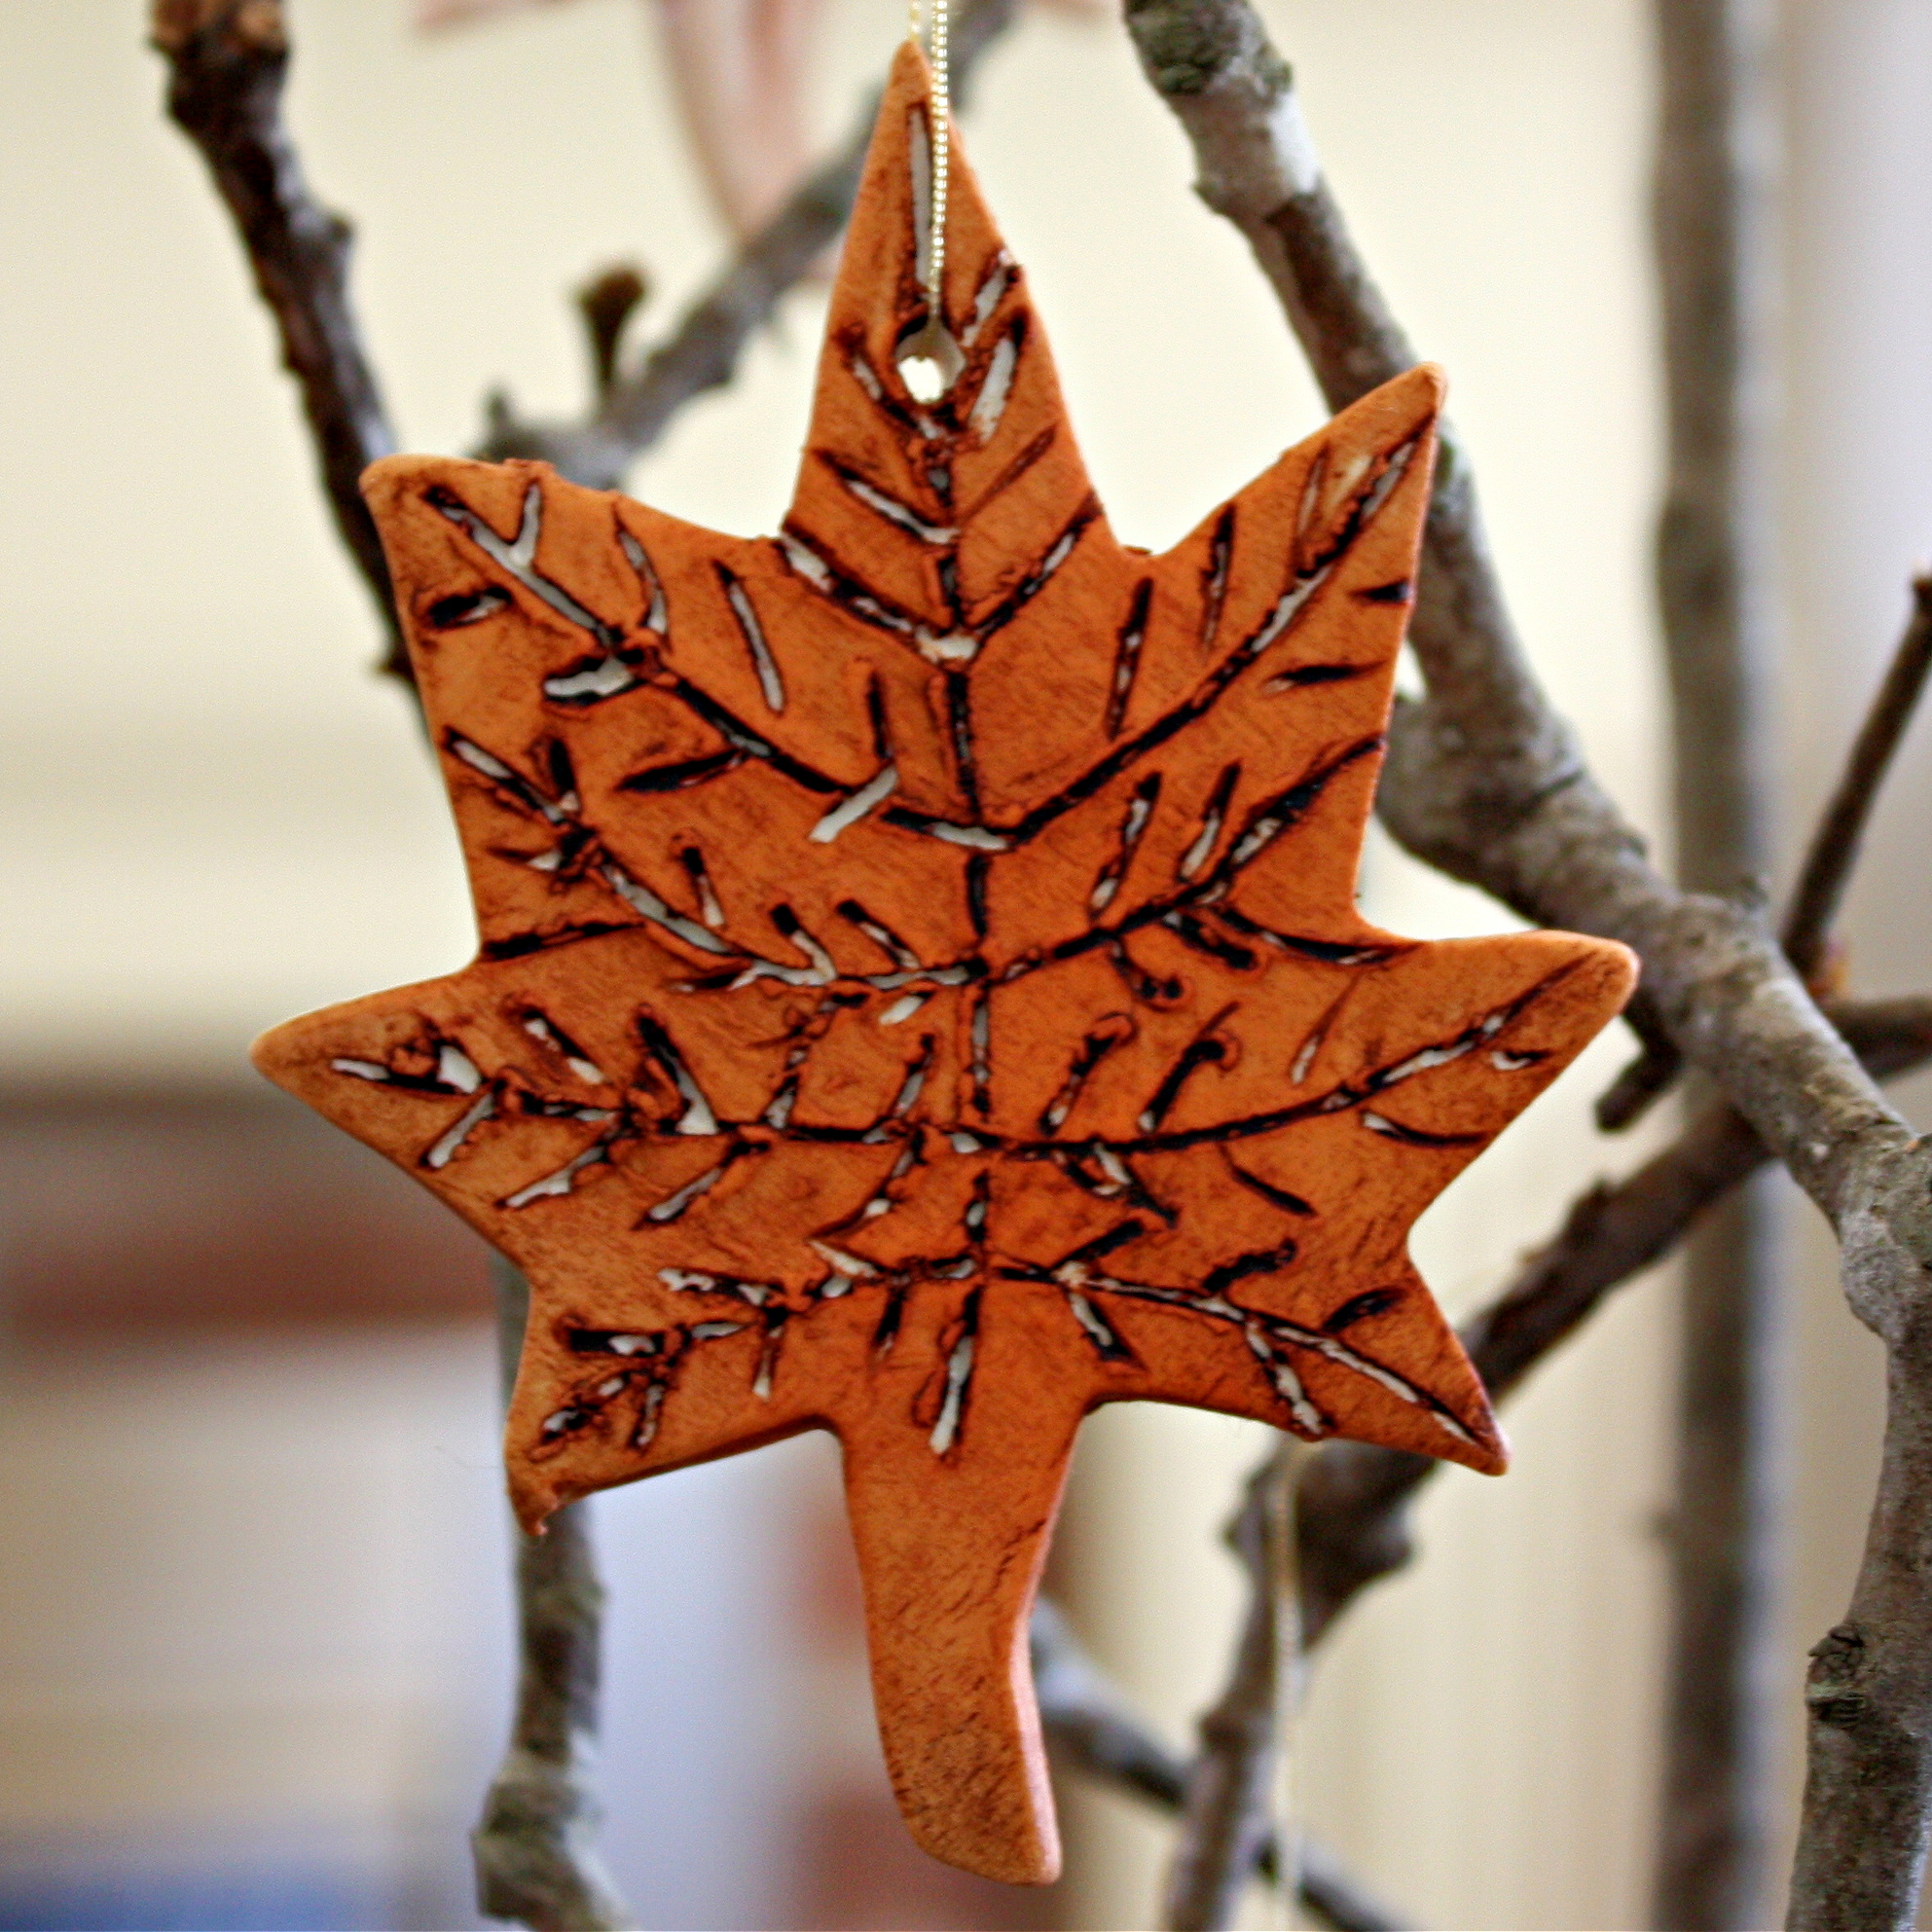 How to Make Fall Ornaments from Clay